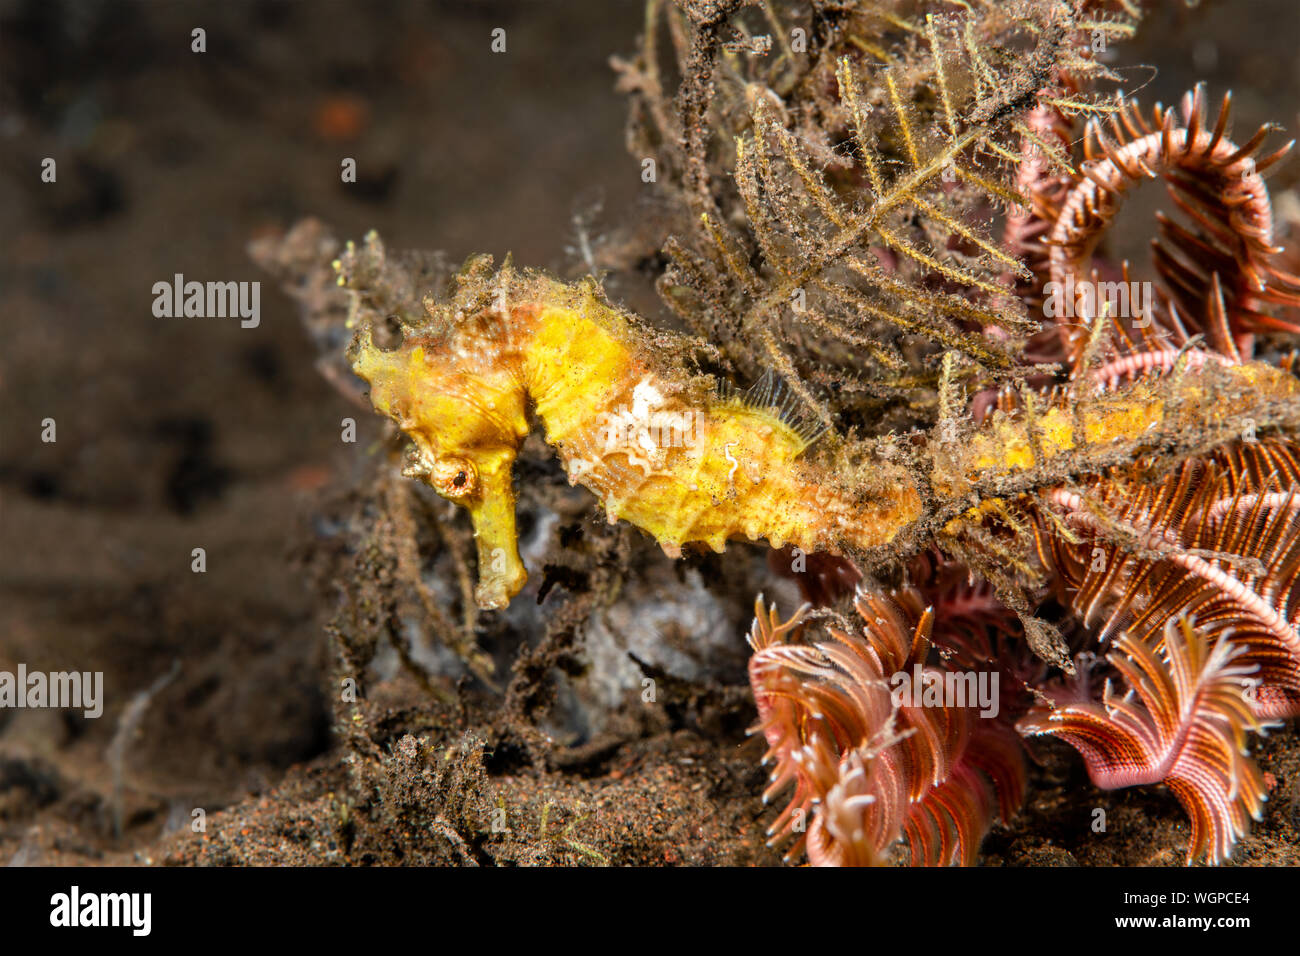 A yellow seahorse uses its tail to secure itself to a reef while resting. Stock Photo